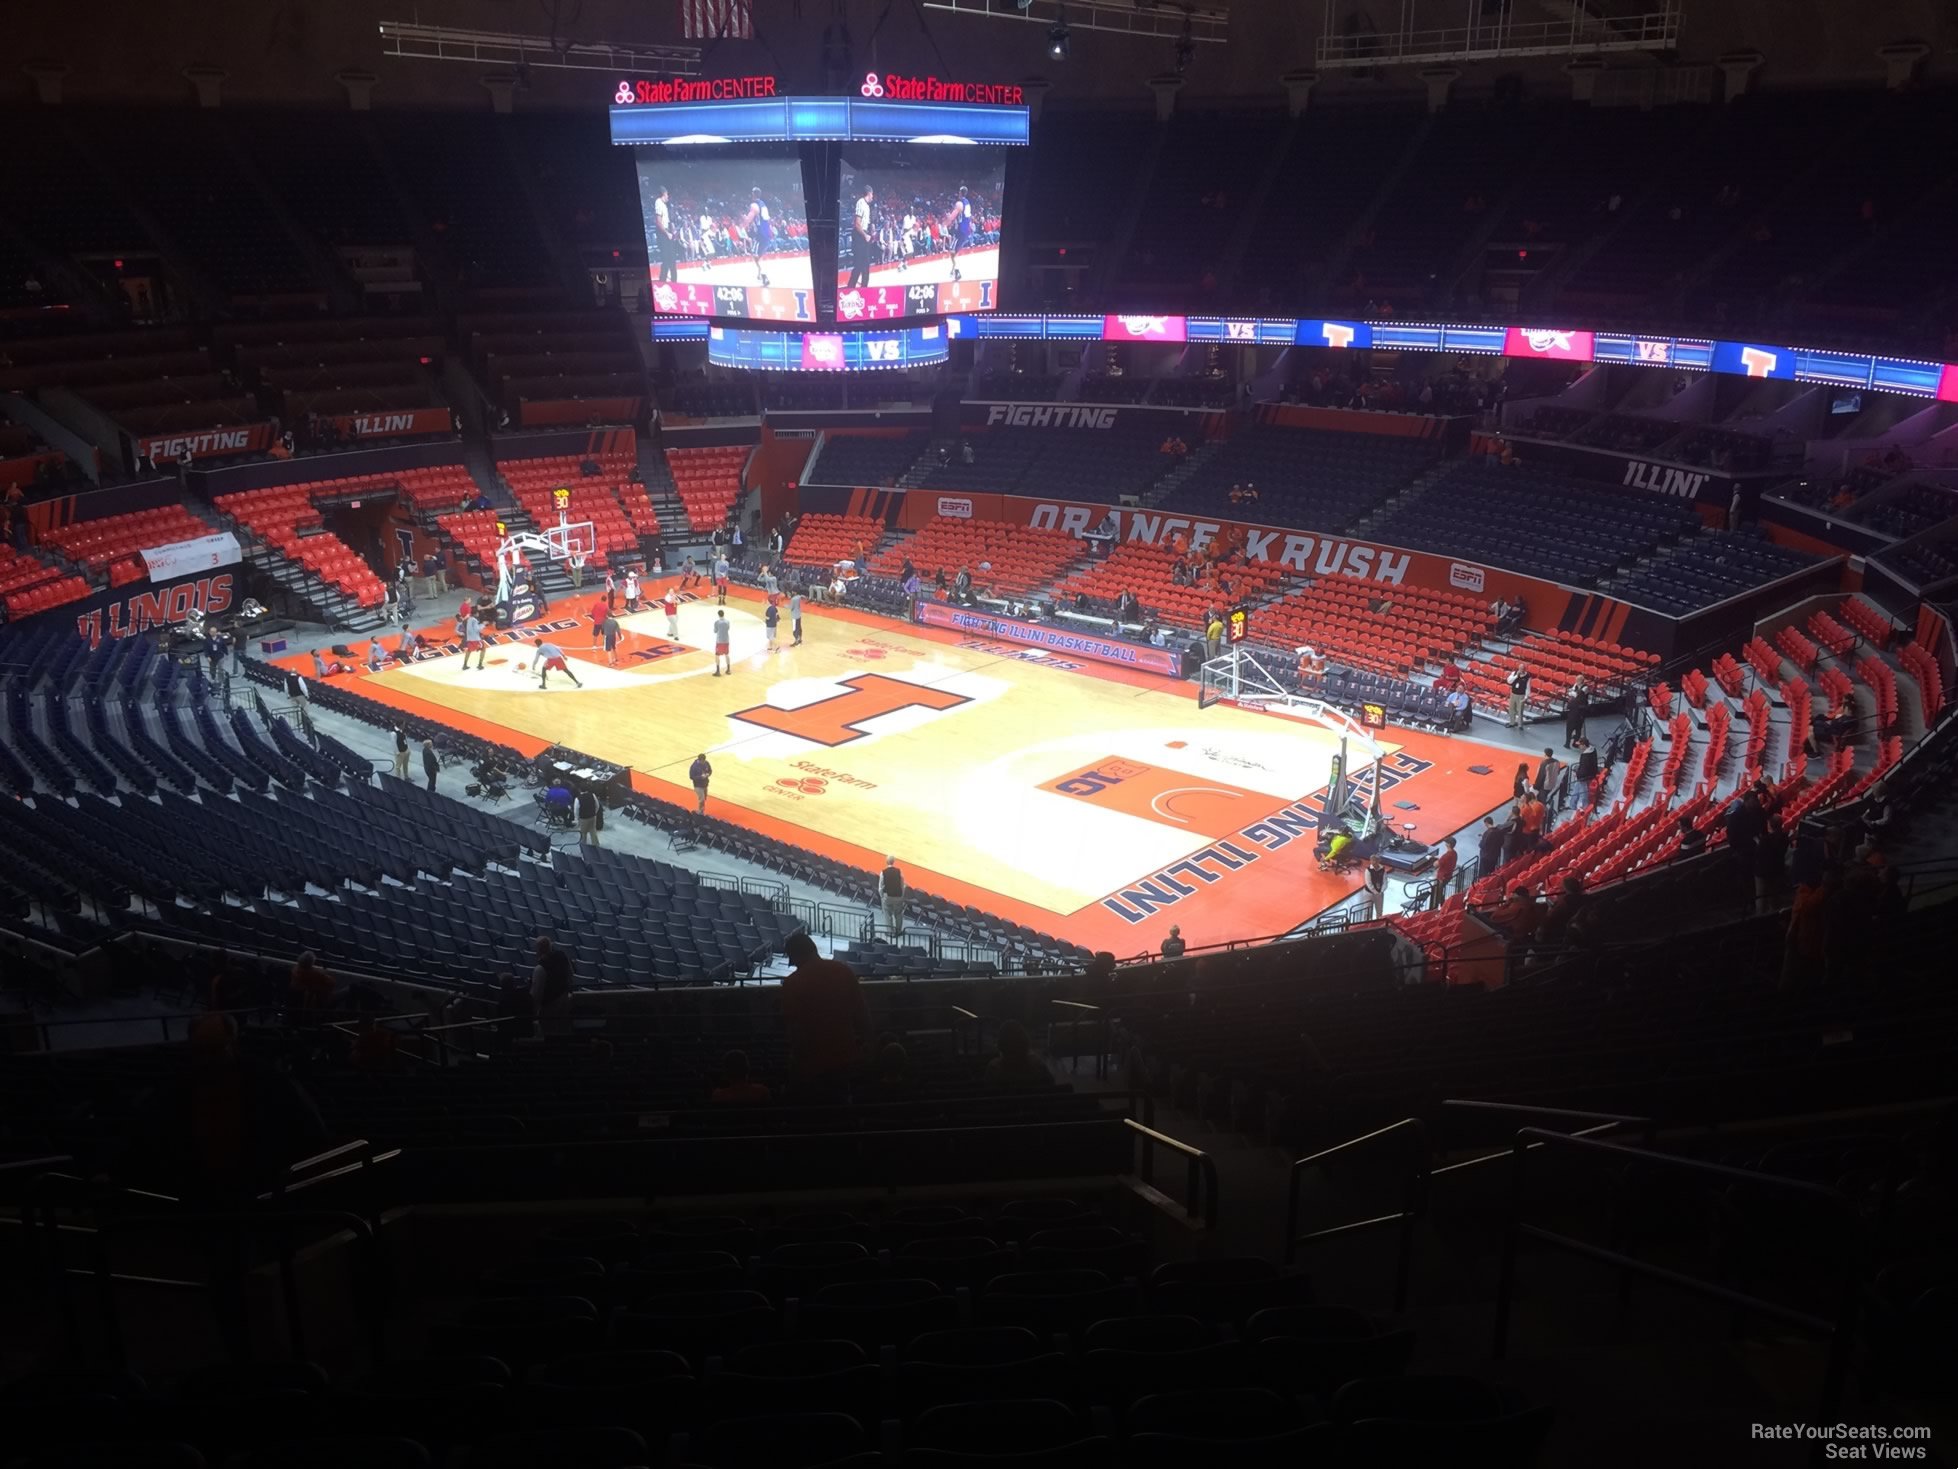 section 243, row 10 seat view  - state farm center